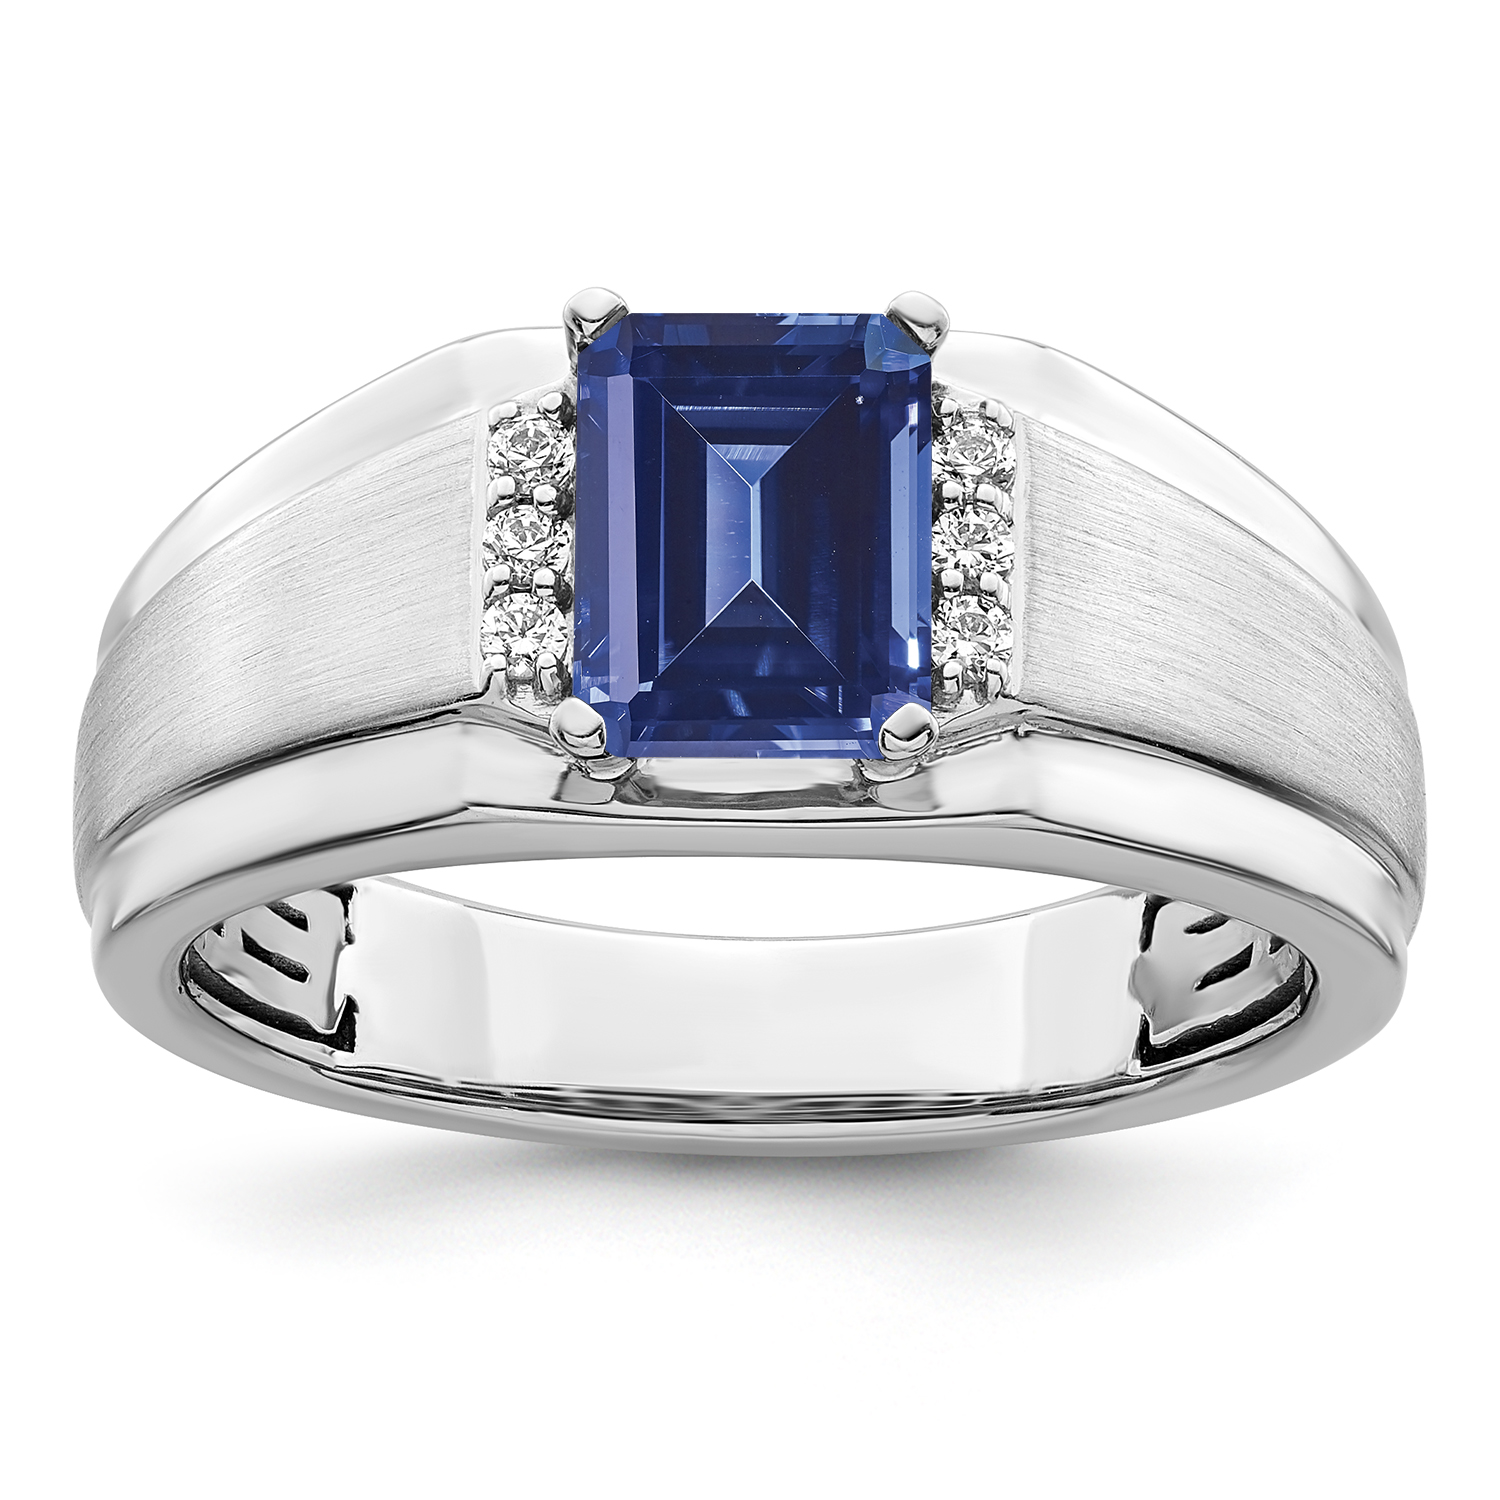 Muscular Man Sapphire Ring Cluster With Royal Blue Sapphire Gemstone  Natural Gem, Good Cut, 925 Sterling Silver Perfect Birthday Gift Size  8x10mm From Zipitang, $33.47 | DHgate.Com